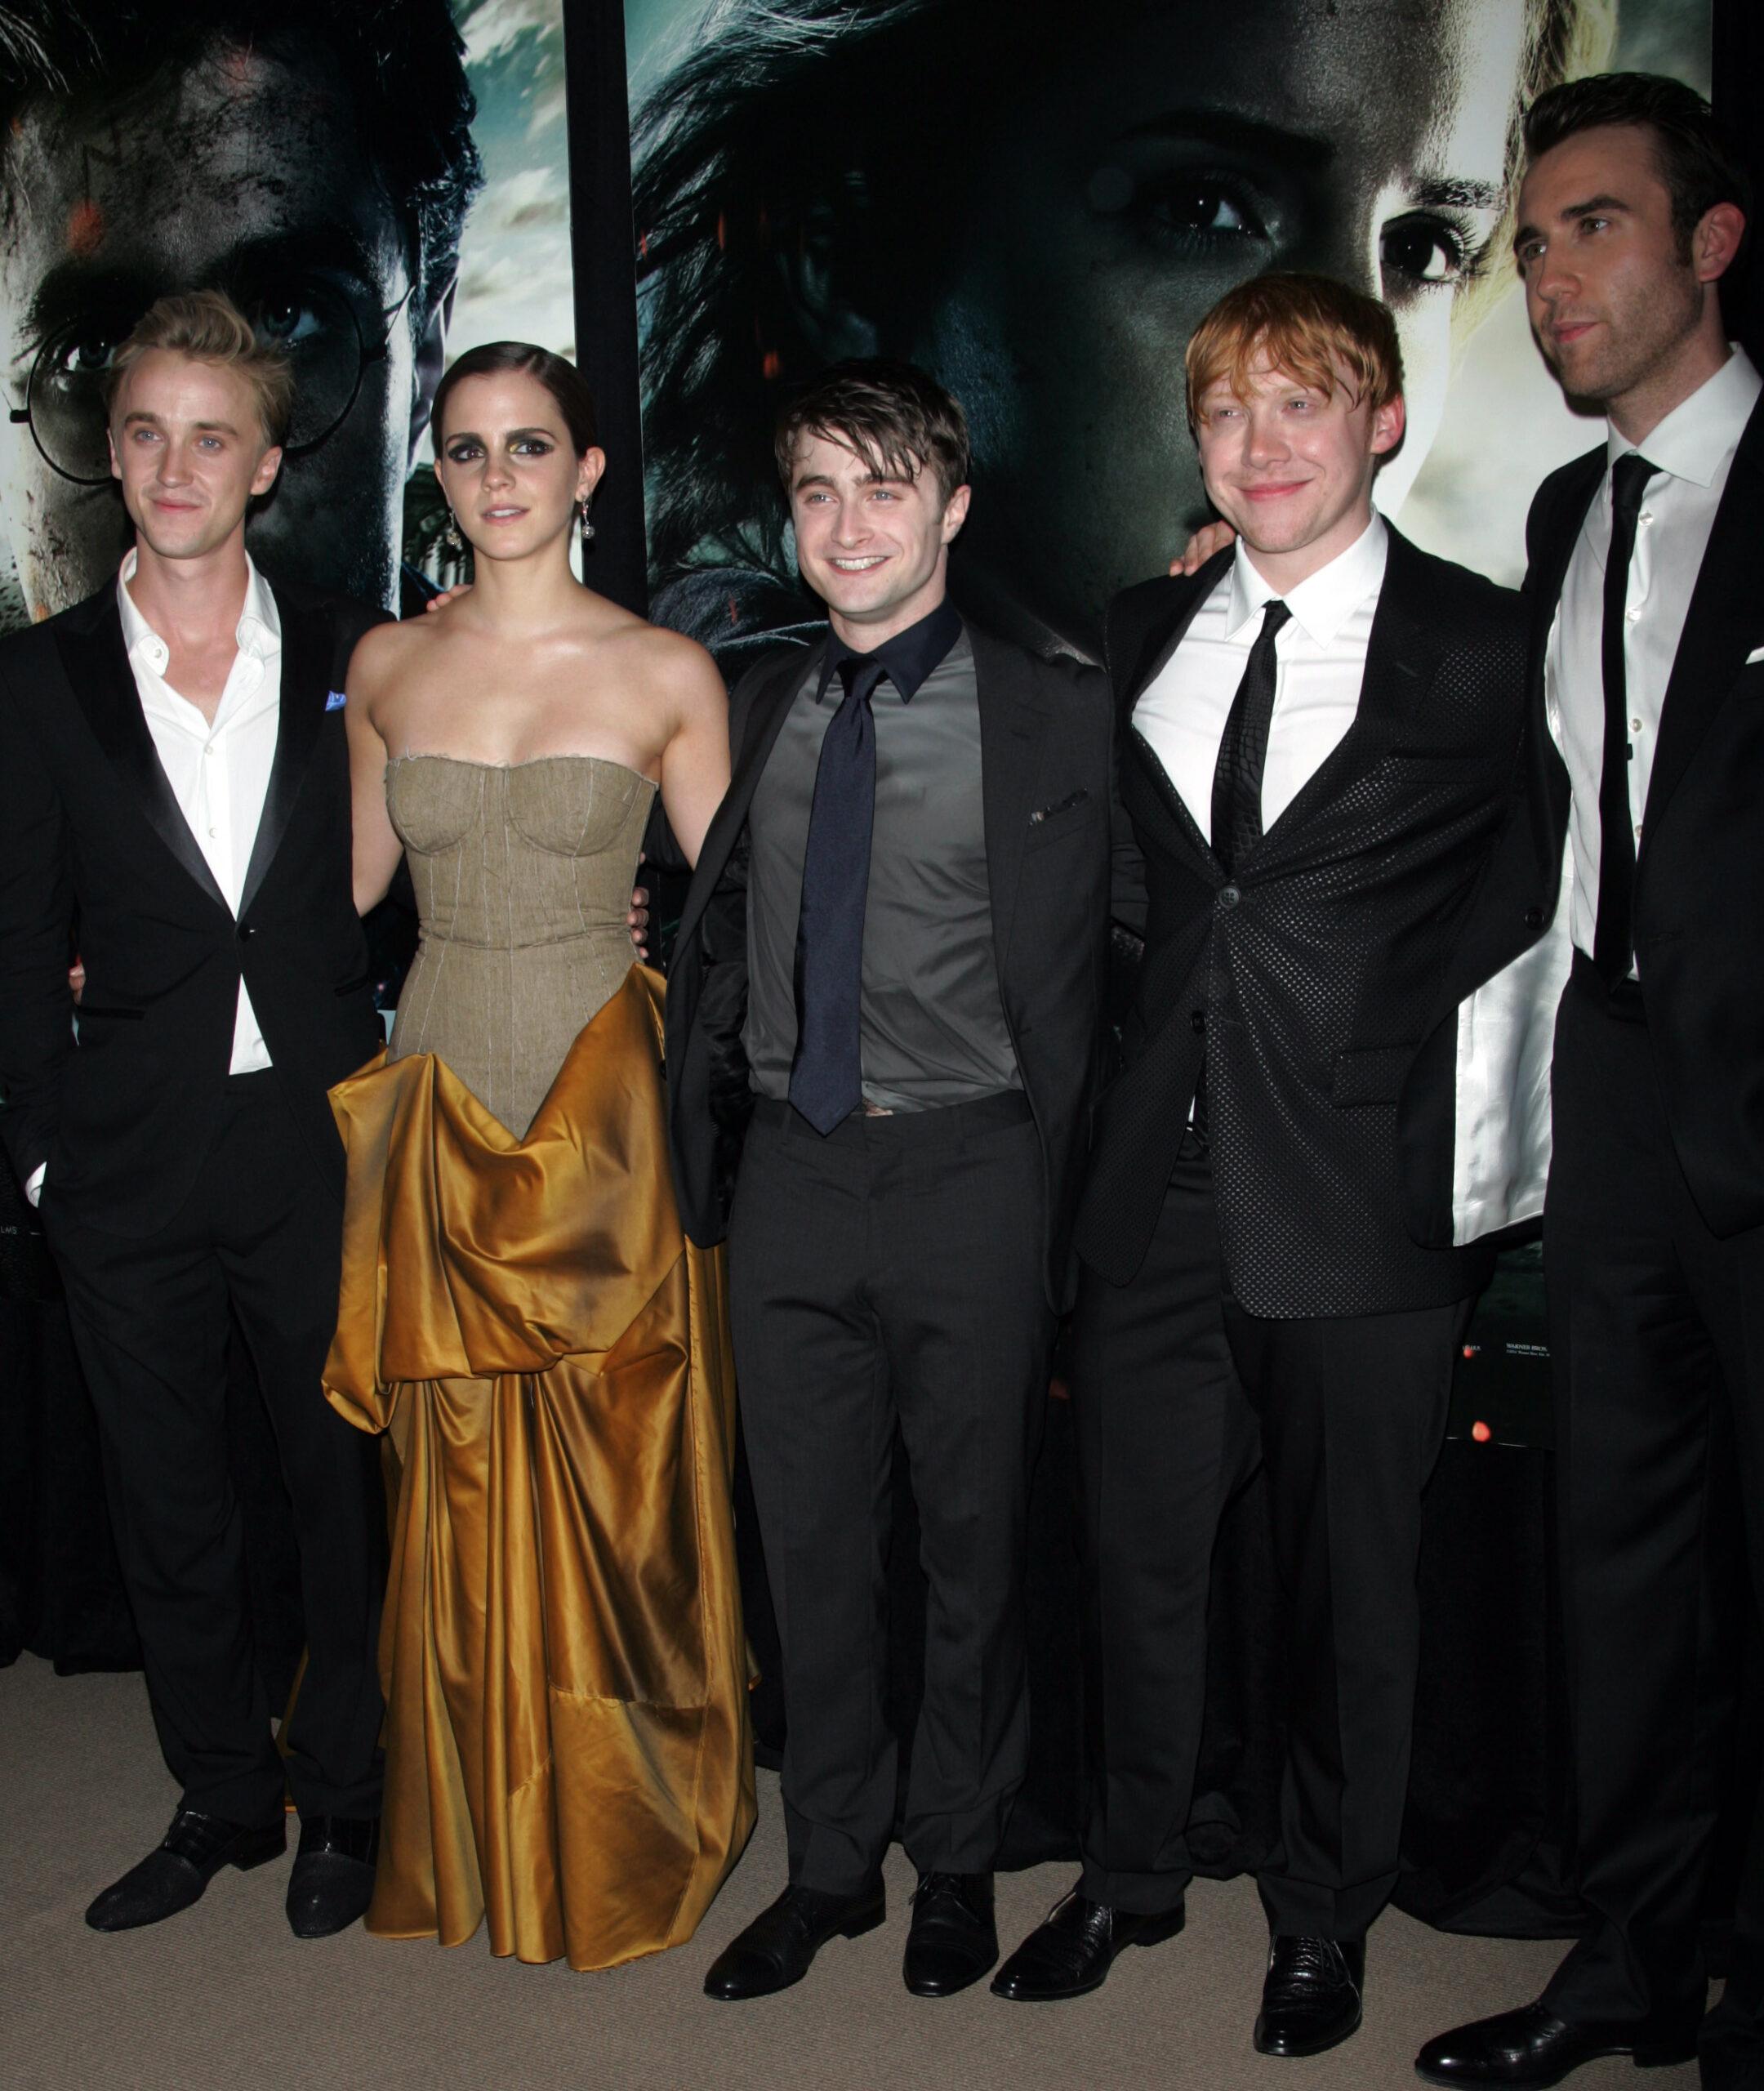 (L-R) Tom Felton, Emma Watson, Daniel Radcliffe, Rupert Grint and Matthew Lewis arrive for the premiere of "Harry Potter and the Deathly Hallows - Part 2" at Avery Fisher Hall, Lincoln Center in New York on July 11, 2011.